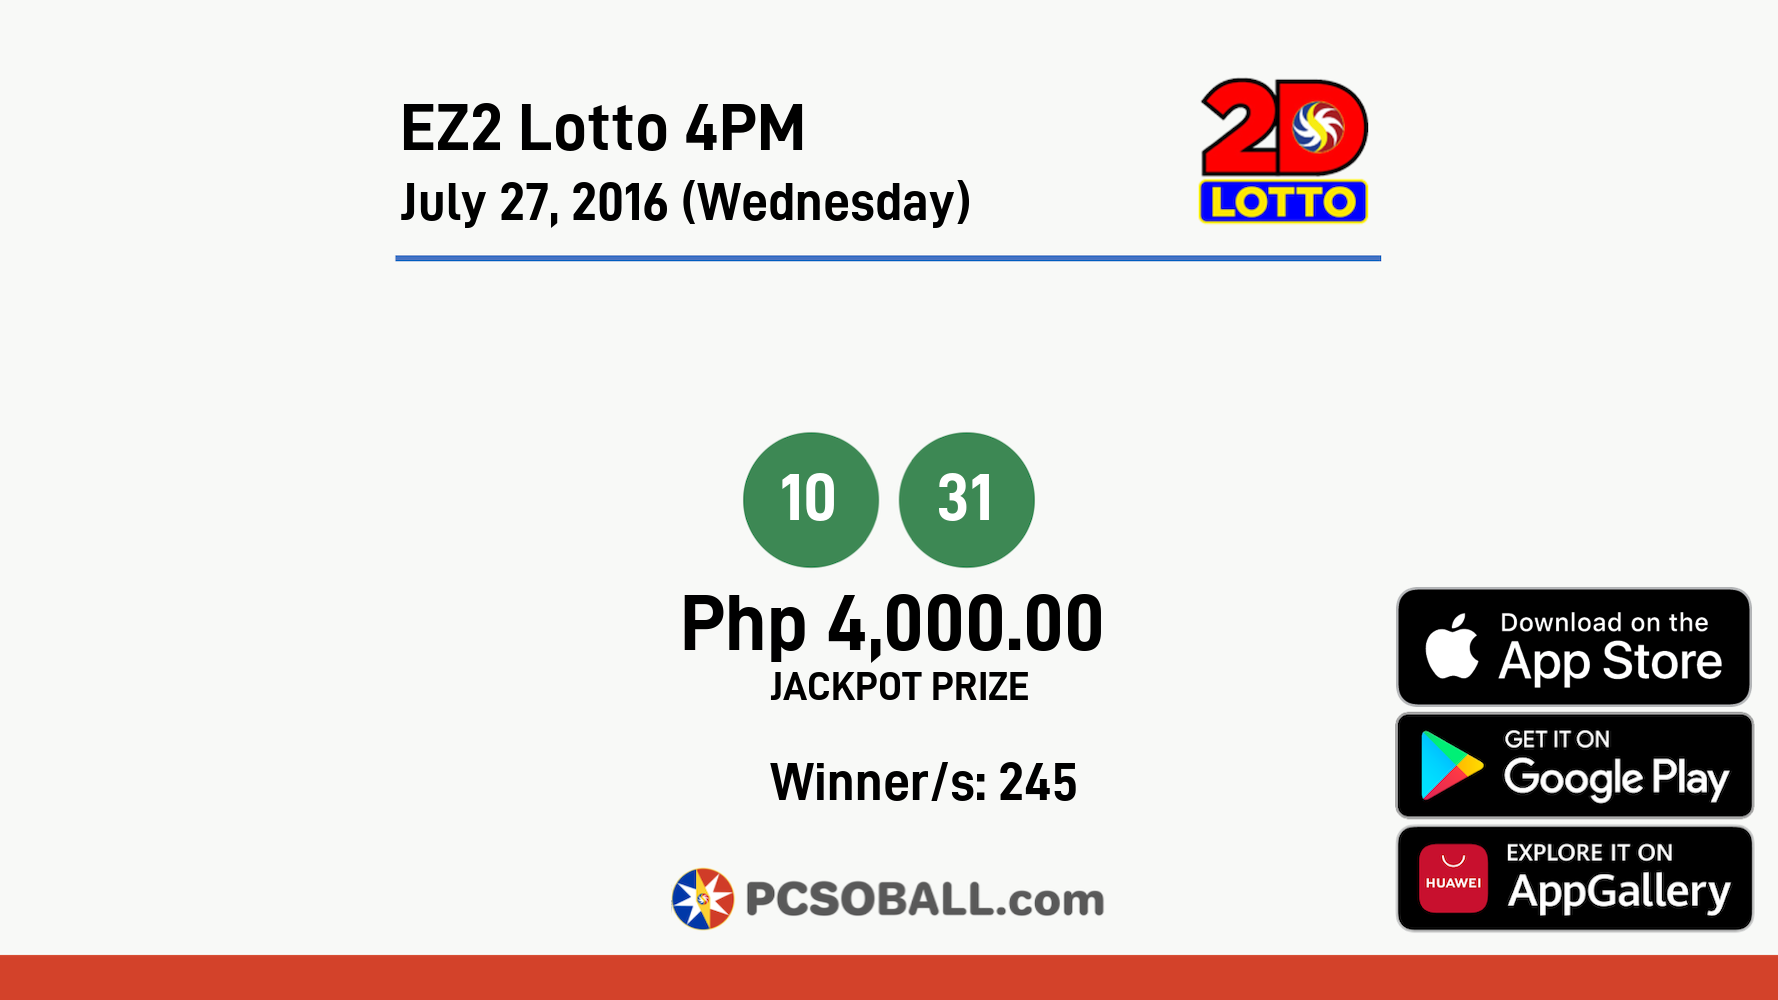 EZ2 Lotto 4PM July 27, 2016 (Wednesday) Result